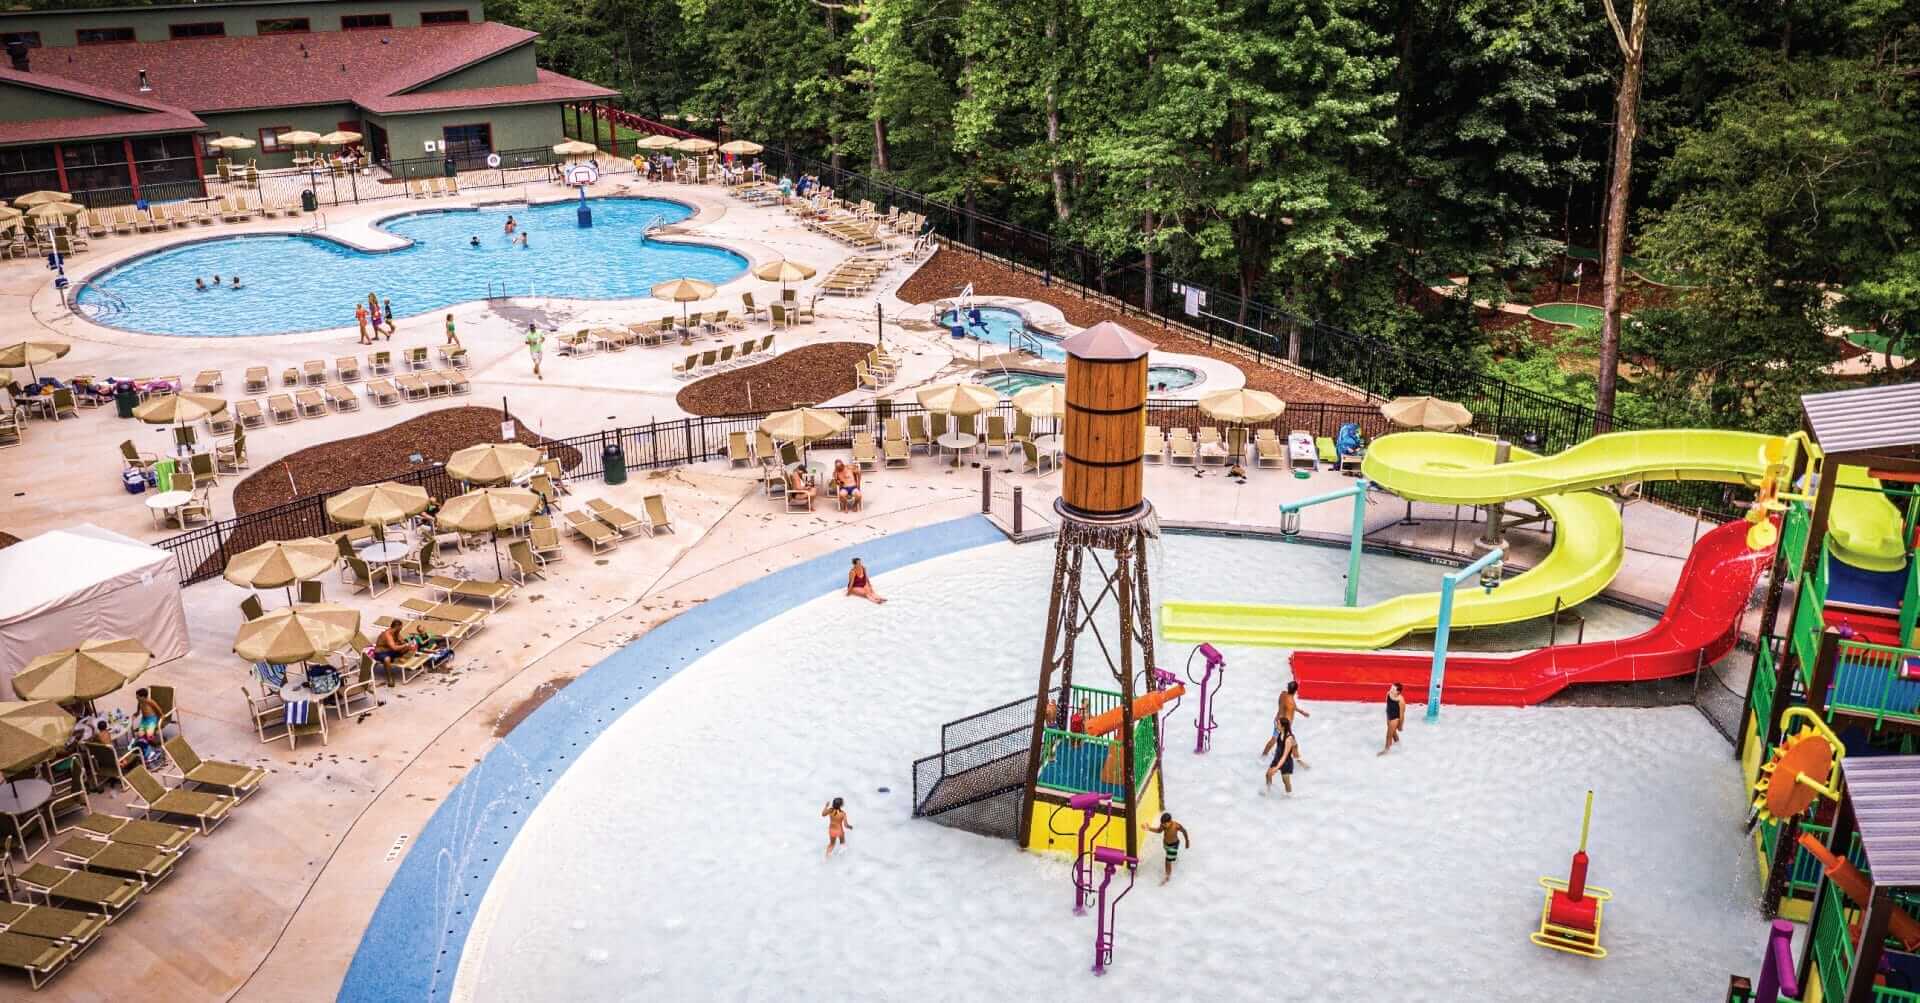 Arial shot of the completed water park by Interactive Play at the Jellystone RV resort in Bostic, North Carolina.